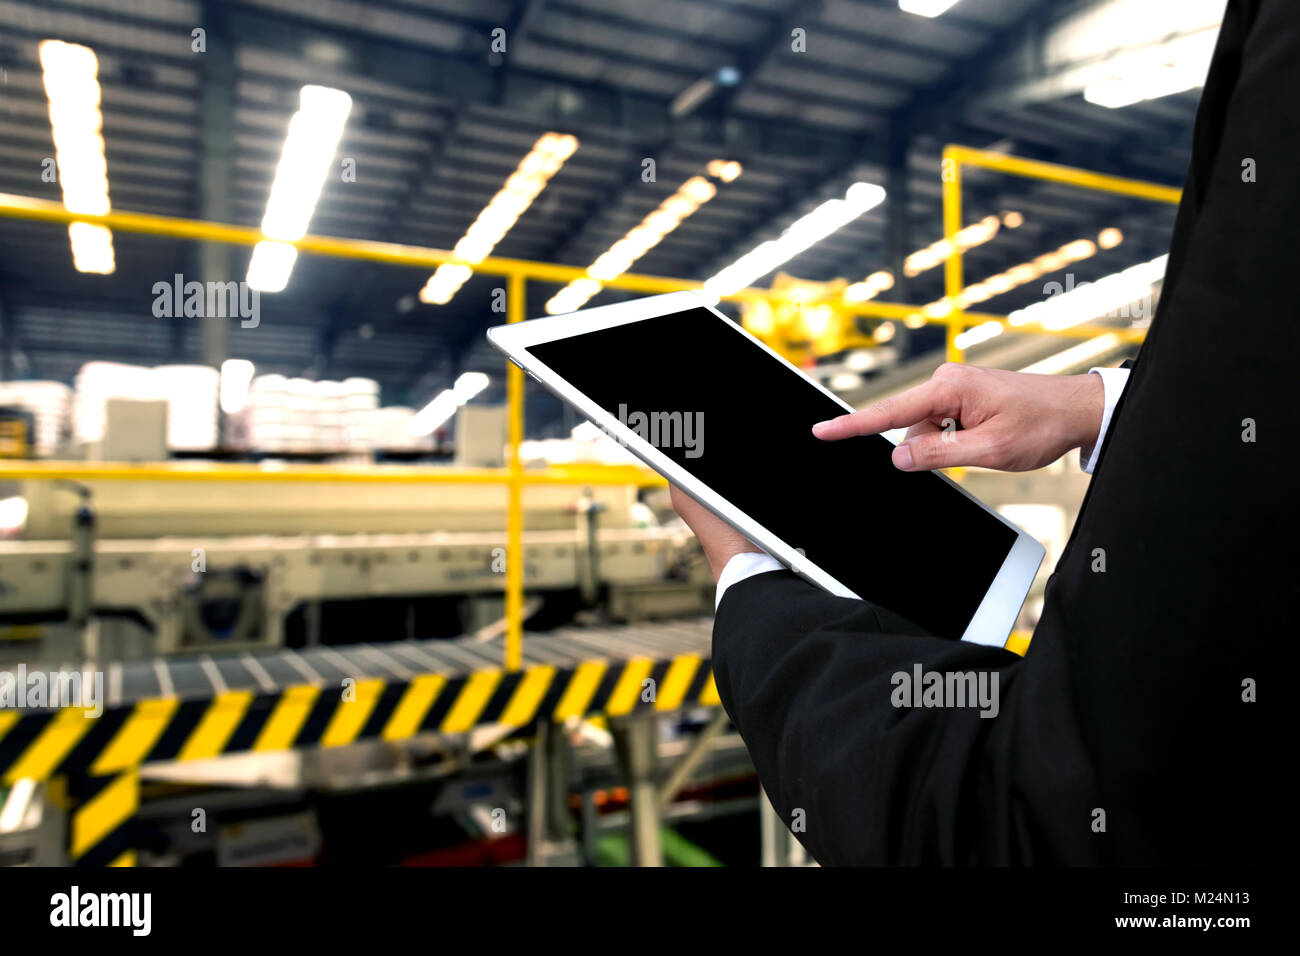 Engineer hand using tablet with machine real time monitoring system software. Automation robot arm , conveyor belt machine  in smart factory industry  Stock Photo